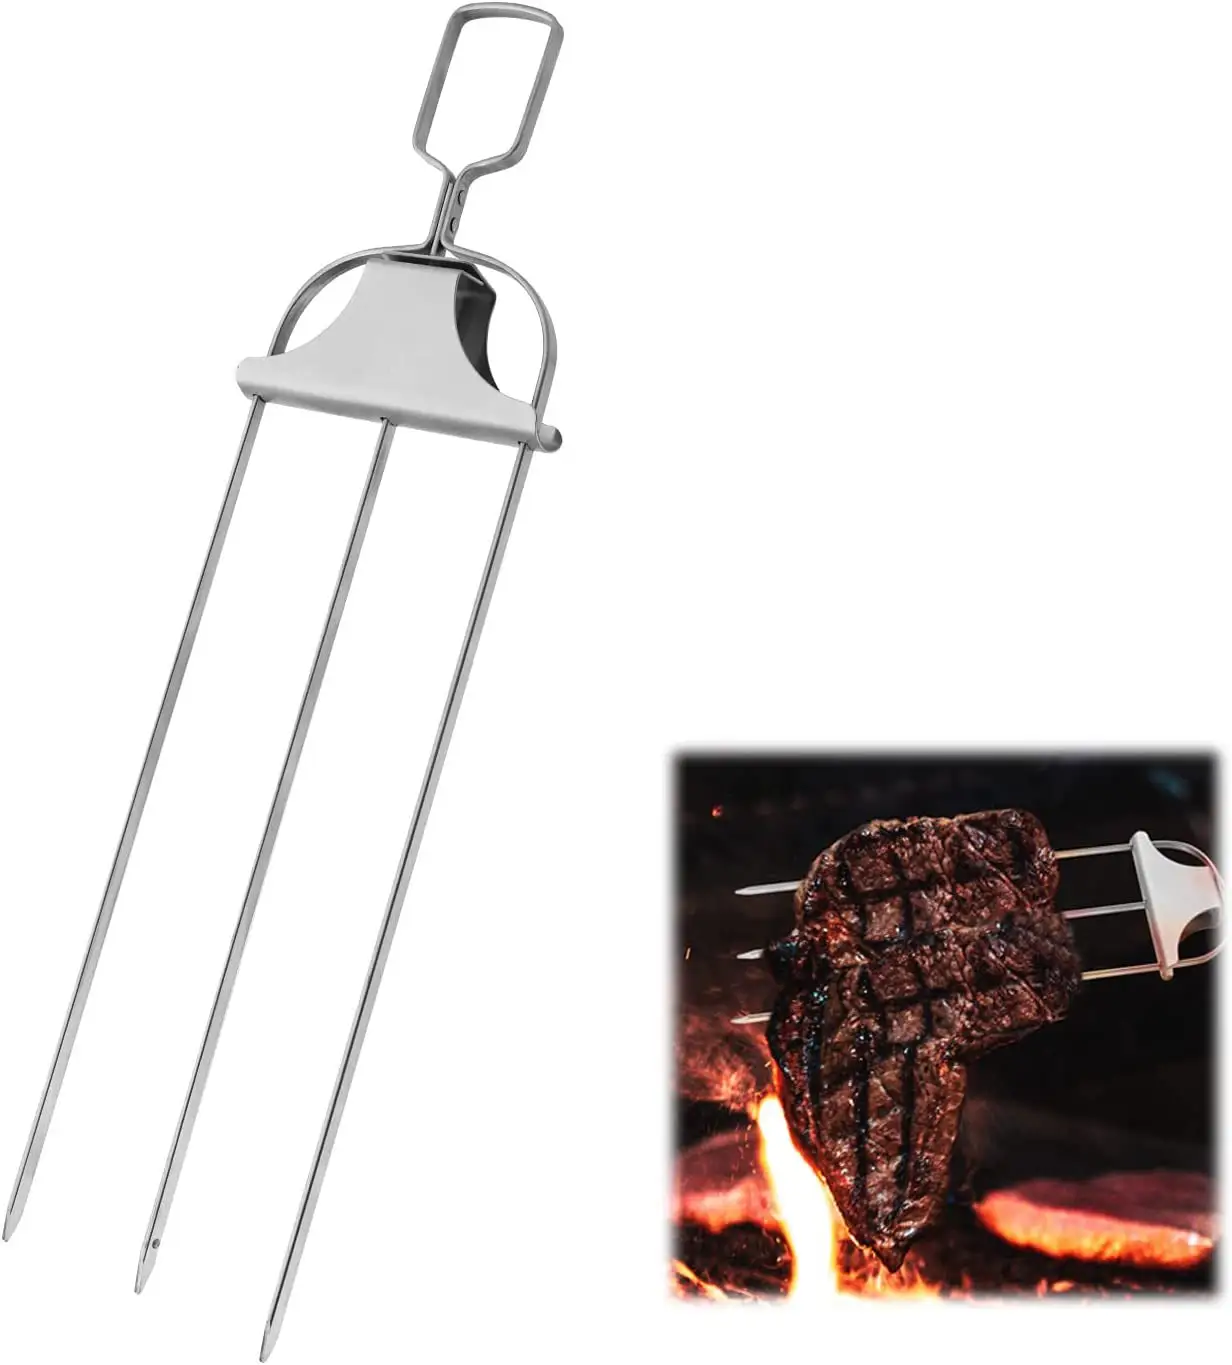 Reusable Metal Skewer For Grilling Stainless Steel 3-Prong Skewers With Push Bar Slider